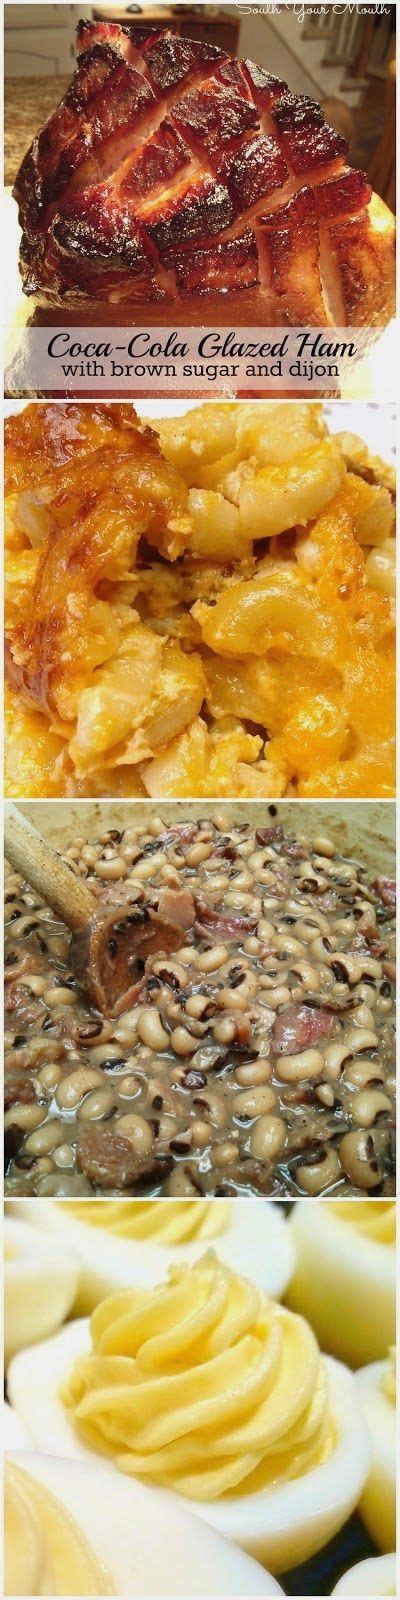 Simple & delicious traditional southern soul food recipes. Christmas Recipes Savoury Ideas | Christmas food dinner, Southern recipes soul food, Recipes